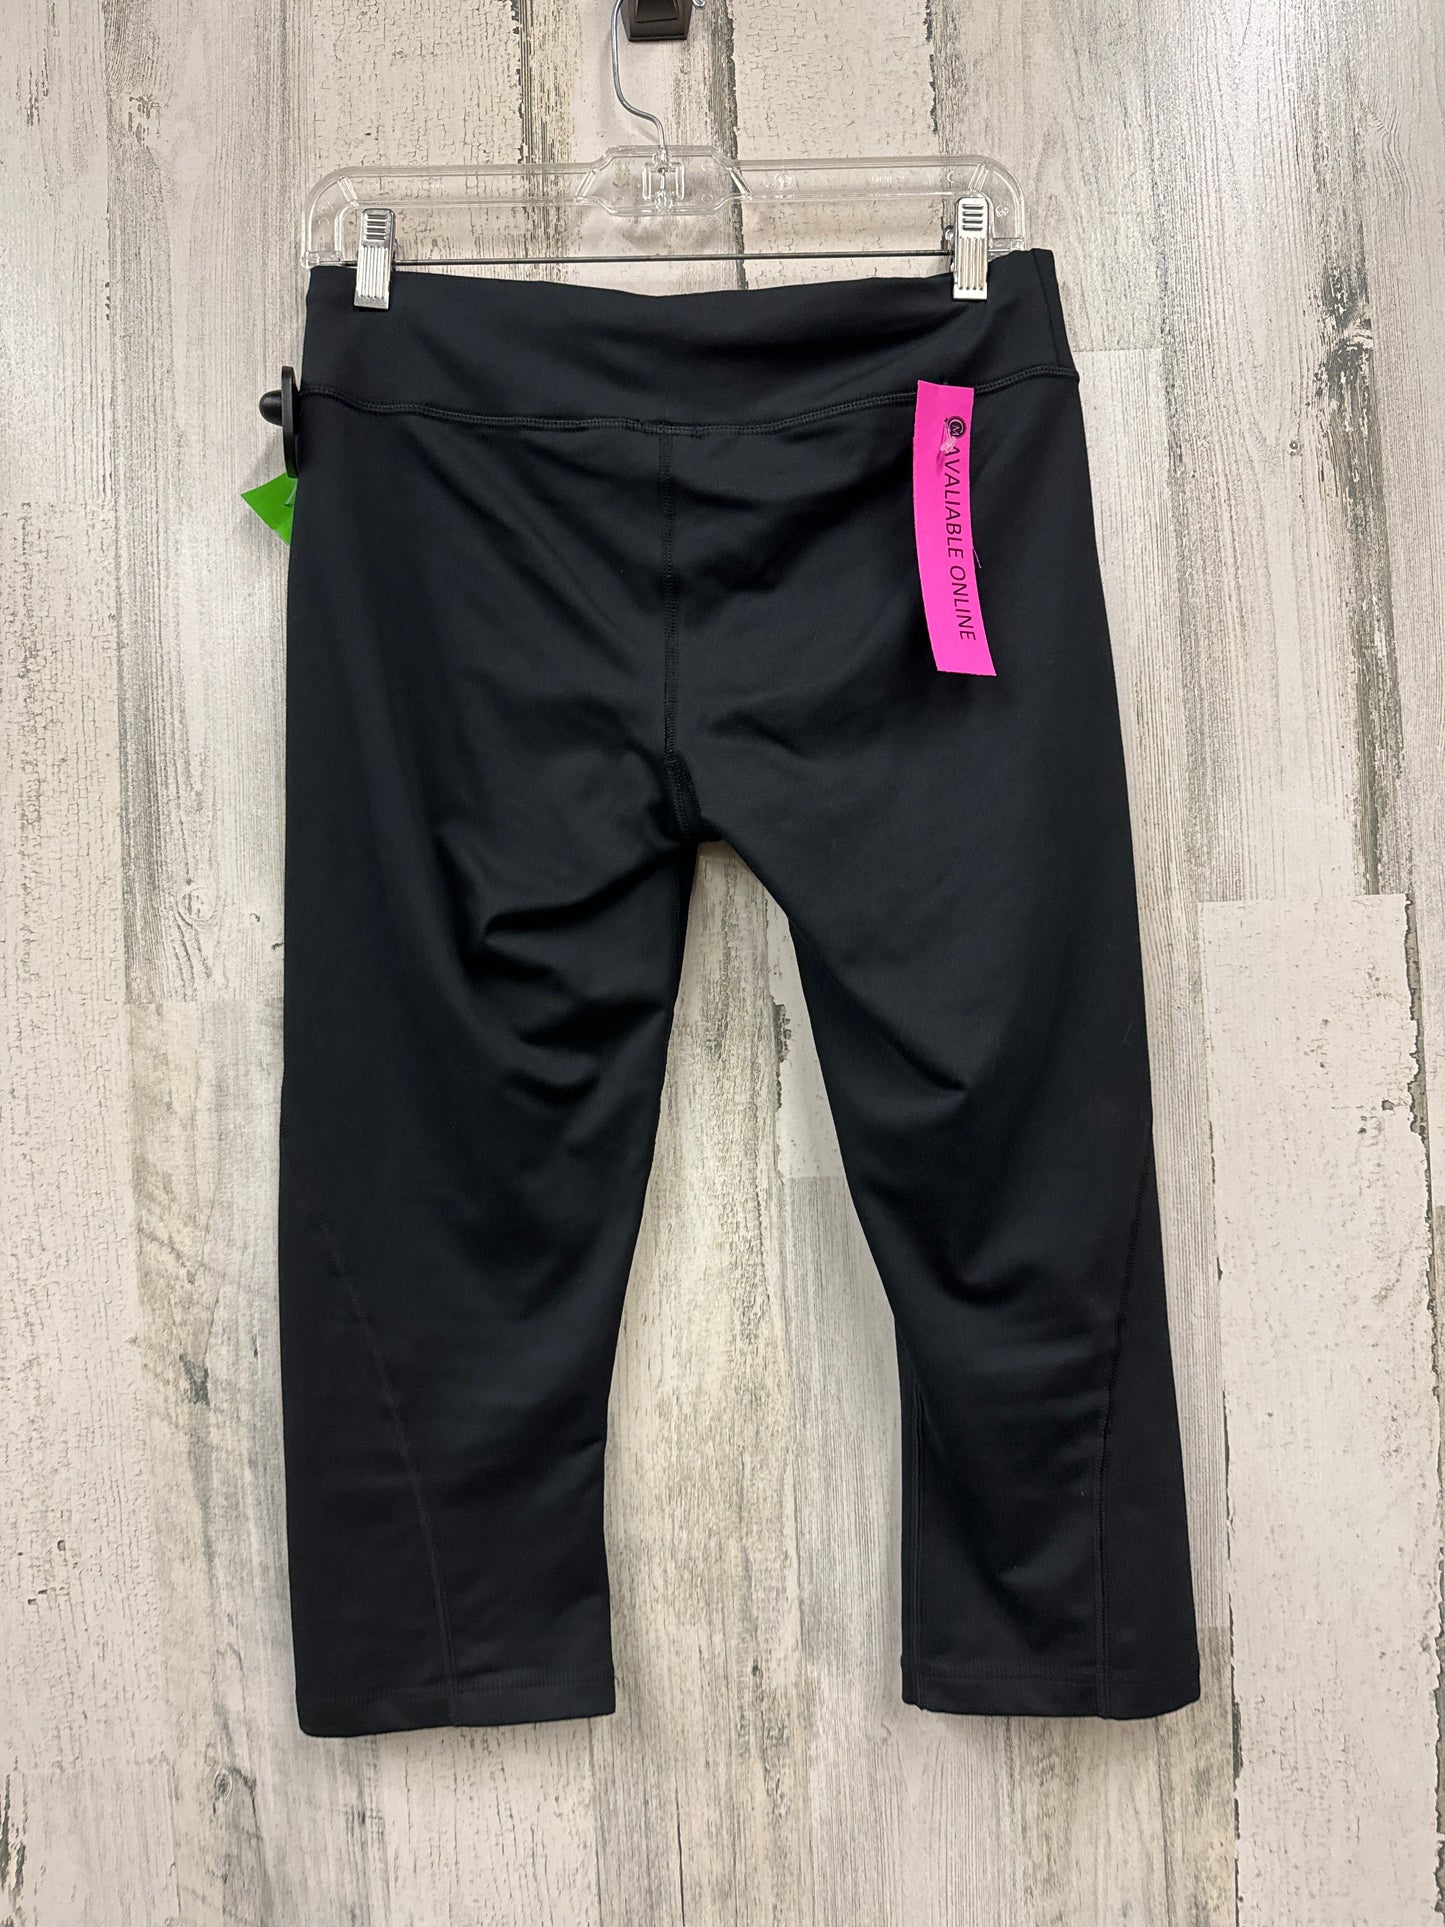 Athletic Capris By North Face  Size: M